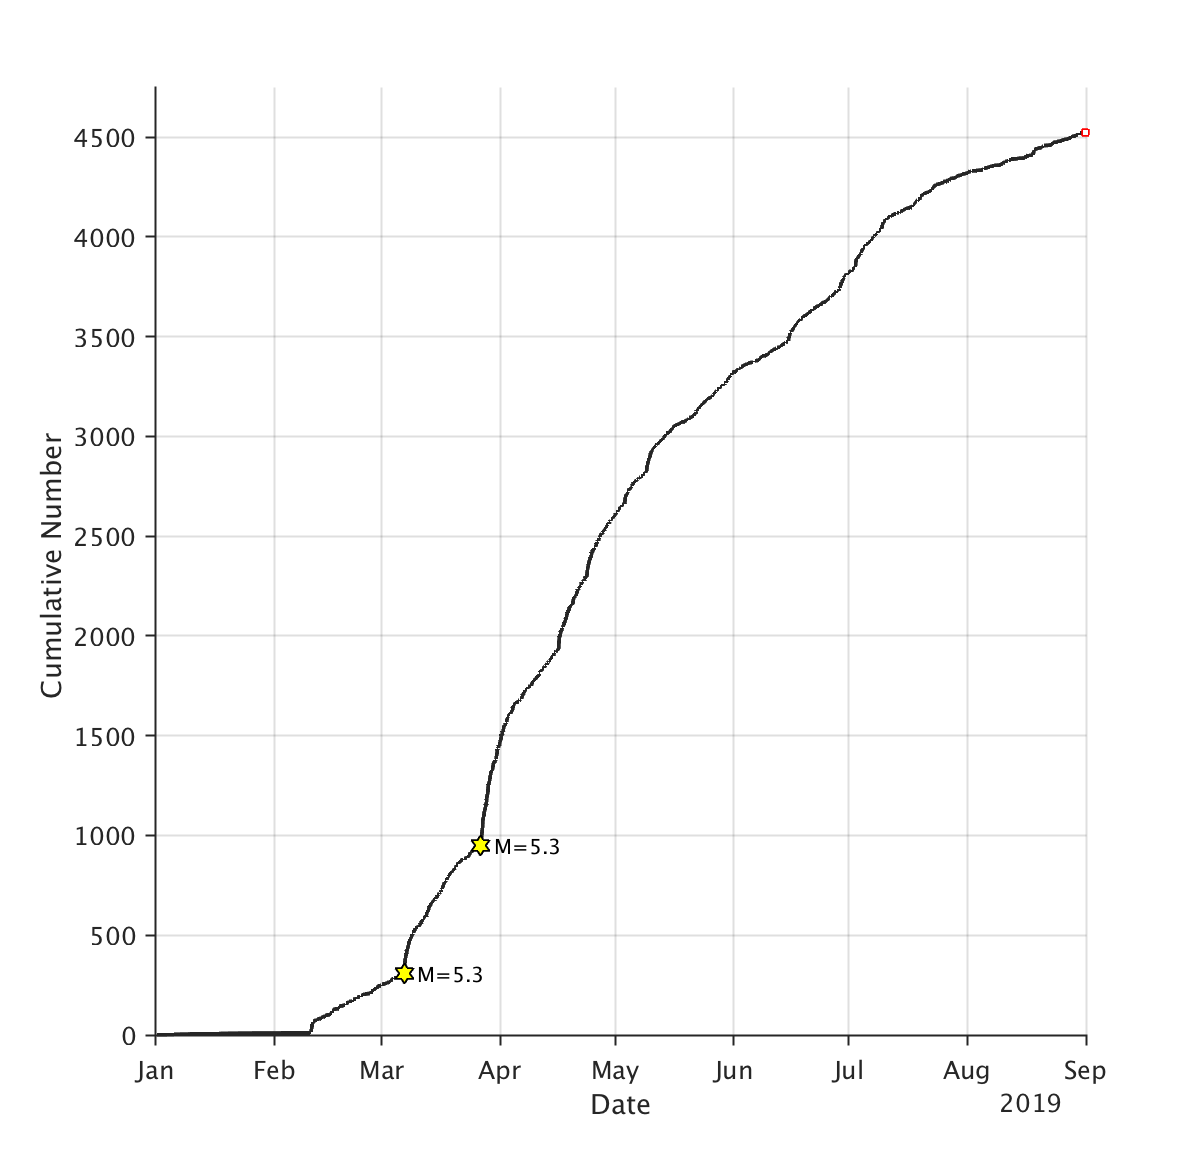 Line graph with cumulative number of earthquakes on vertical axis, dates on horizontal axis. Small rise to about 300 earthquakes starting February 2019, with a magnitude 5.3 in March 2019. Activity increases more steeply to 1,000 earthquakes with a M5.3 at the end of March. The line rises in short bursts to almost 4,500 earthquakes by September 2019.